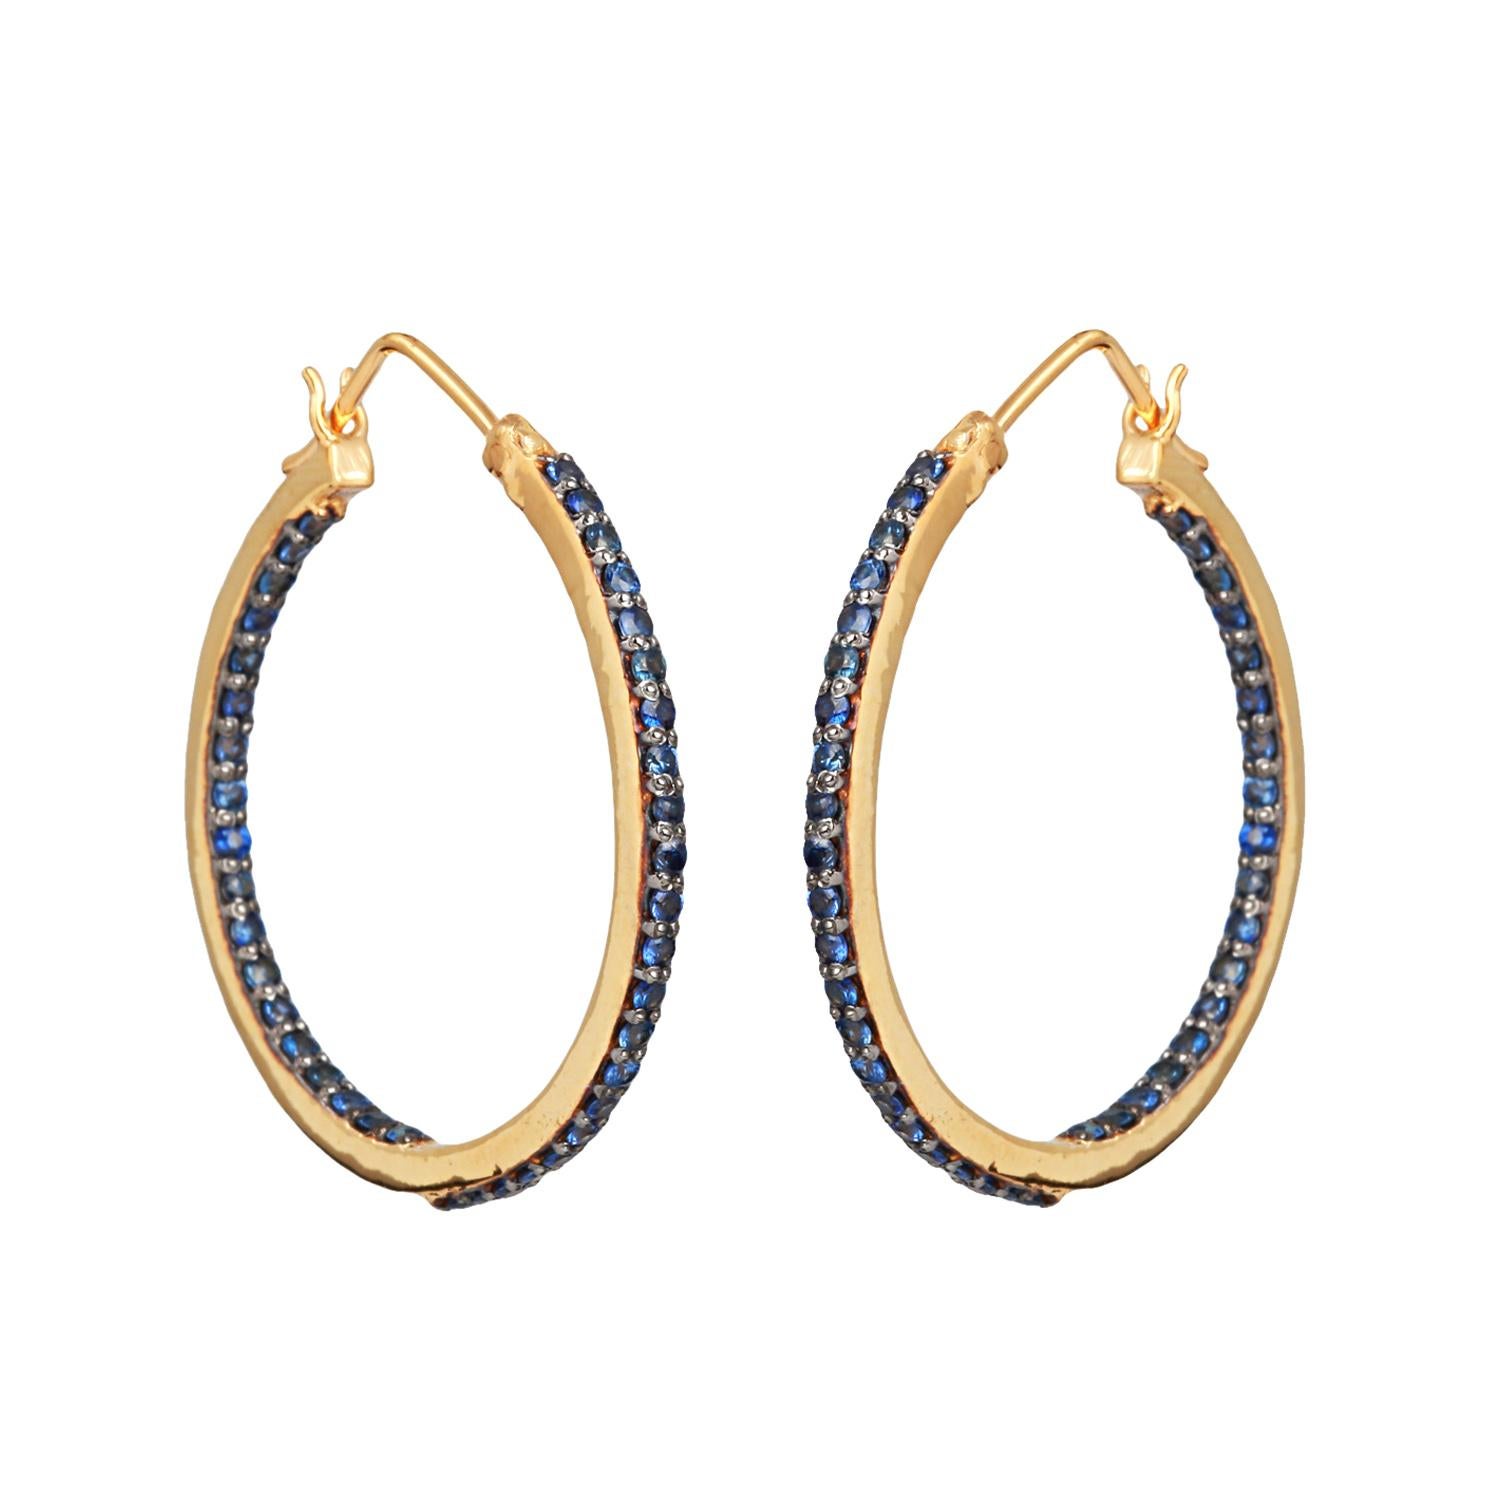 Gemstone Sapphire Hoop gold Earrings with 1.98 carat sapphire . Total Gross weight 6.600 grams, 14K polished gold 0.550 grams and 925 sterling silver 5.654 grams.

The Blue Sapphire (Neelam) gemstone helps in handling nerve related tensions,